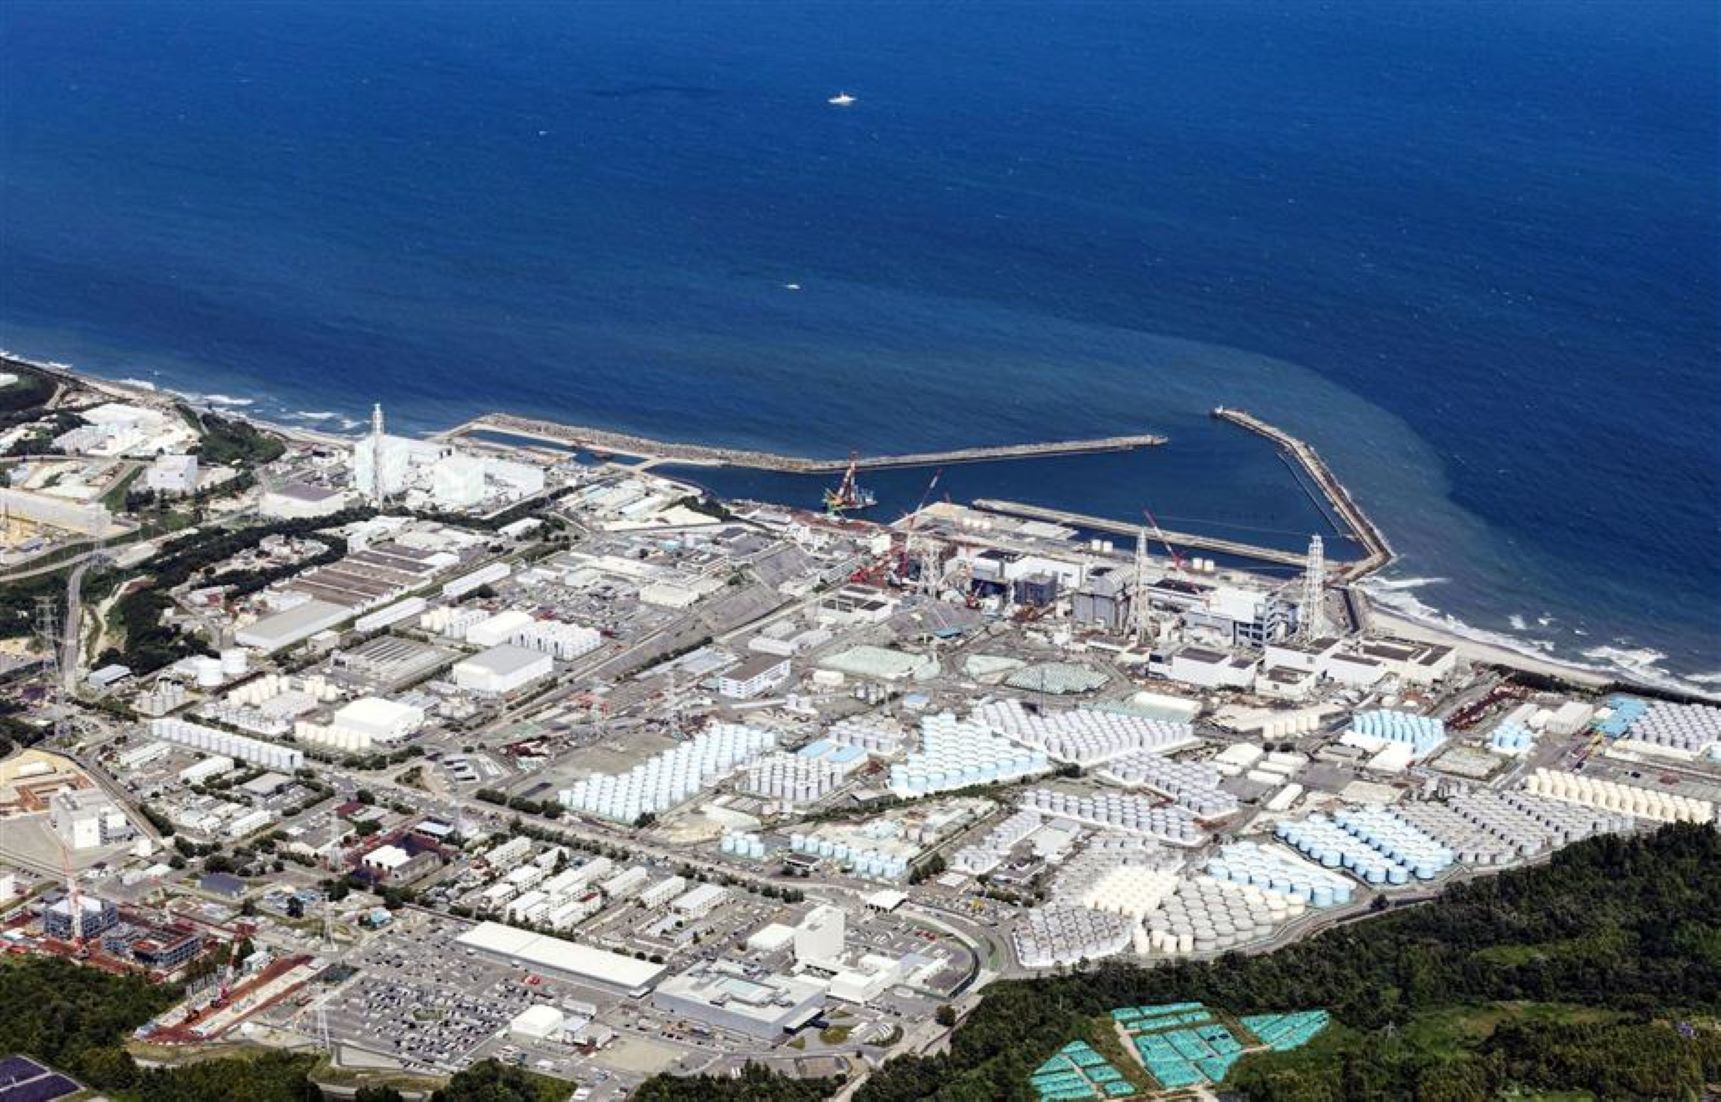 Japan Started Third Release Of Nuclear-Contaminated Wastewater Into Ocean Despite Opposition